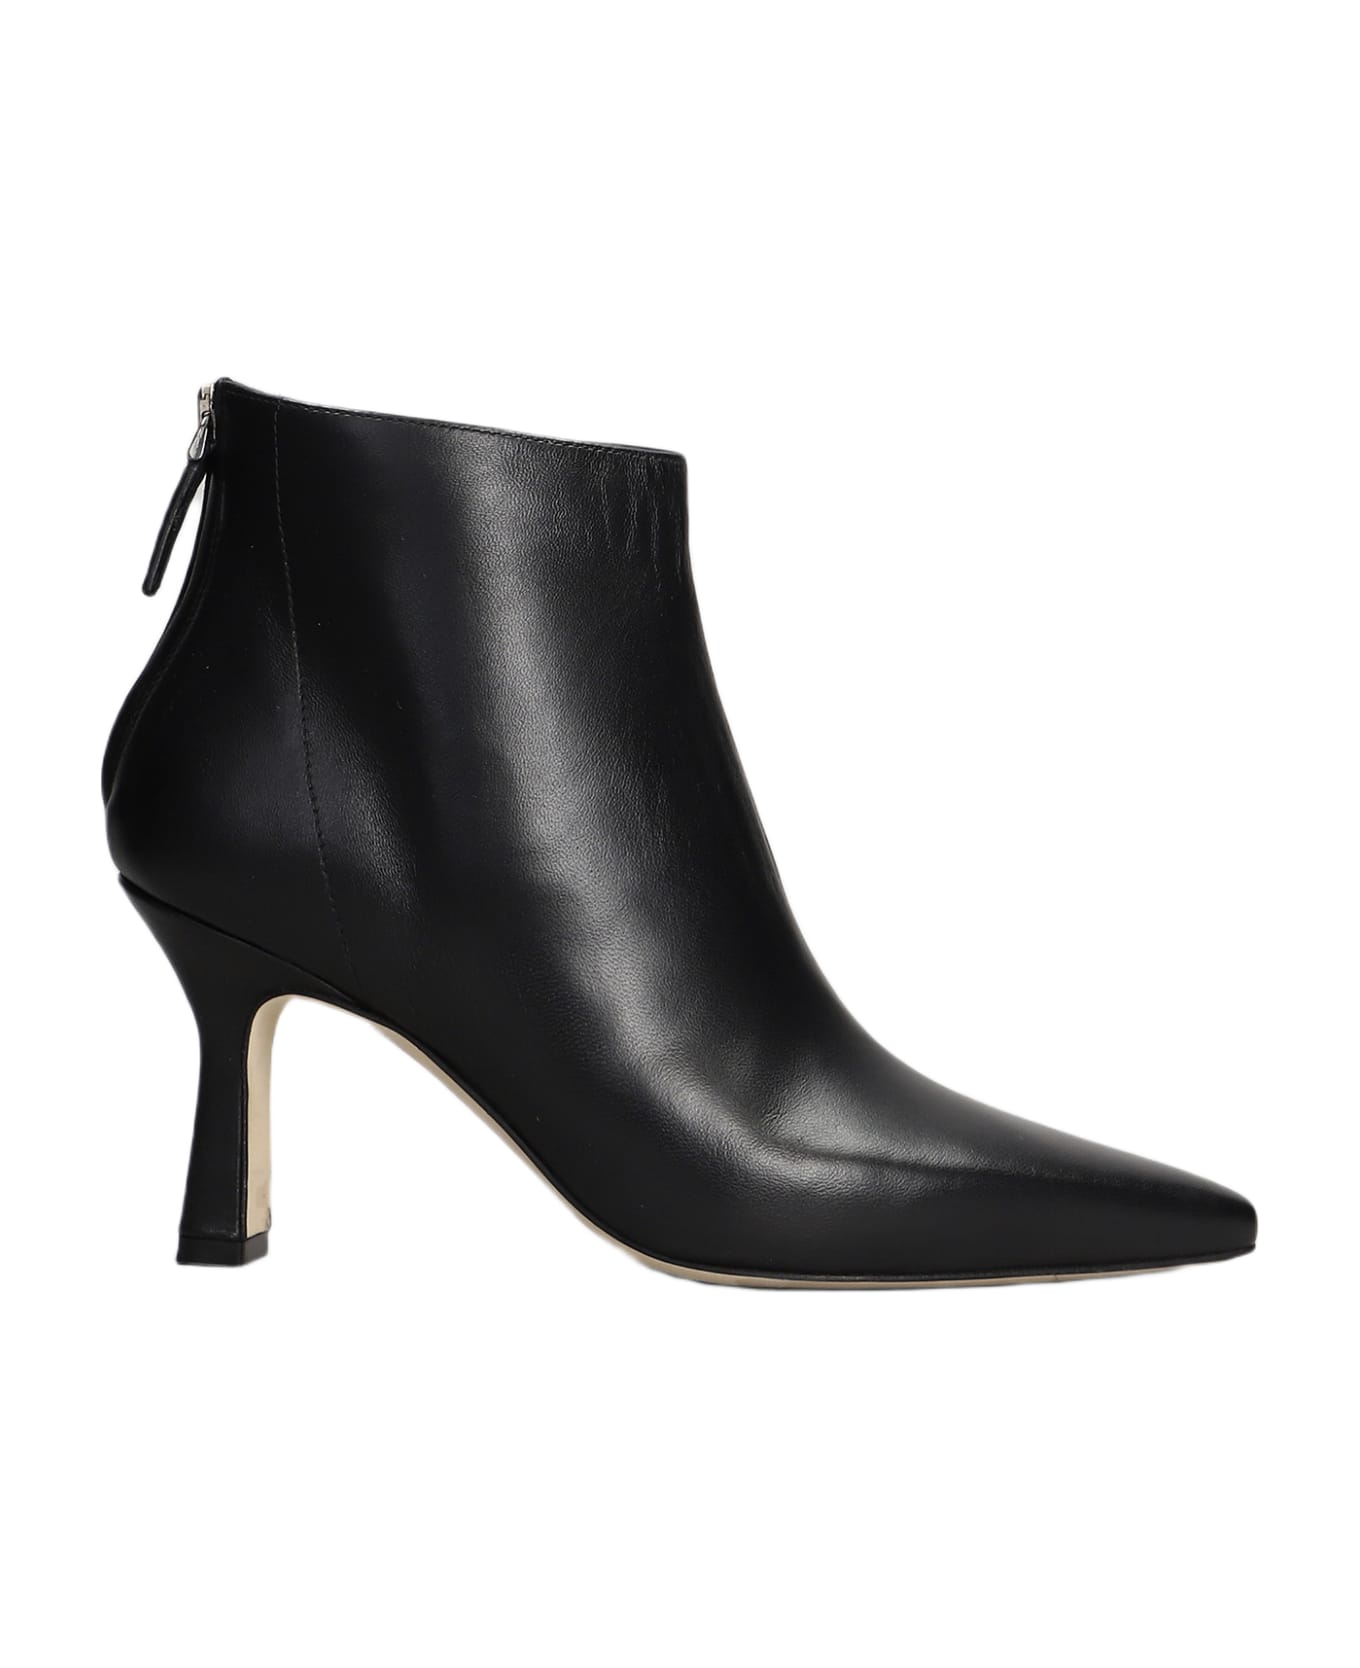 The Seller High Heels Ankle Boots In Black Leather - black ブーツ